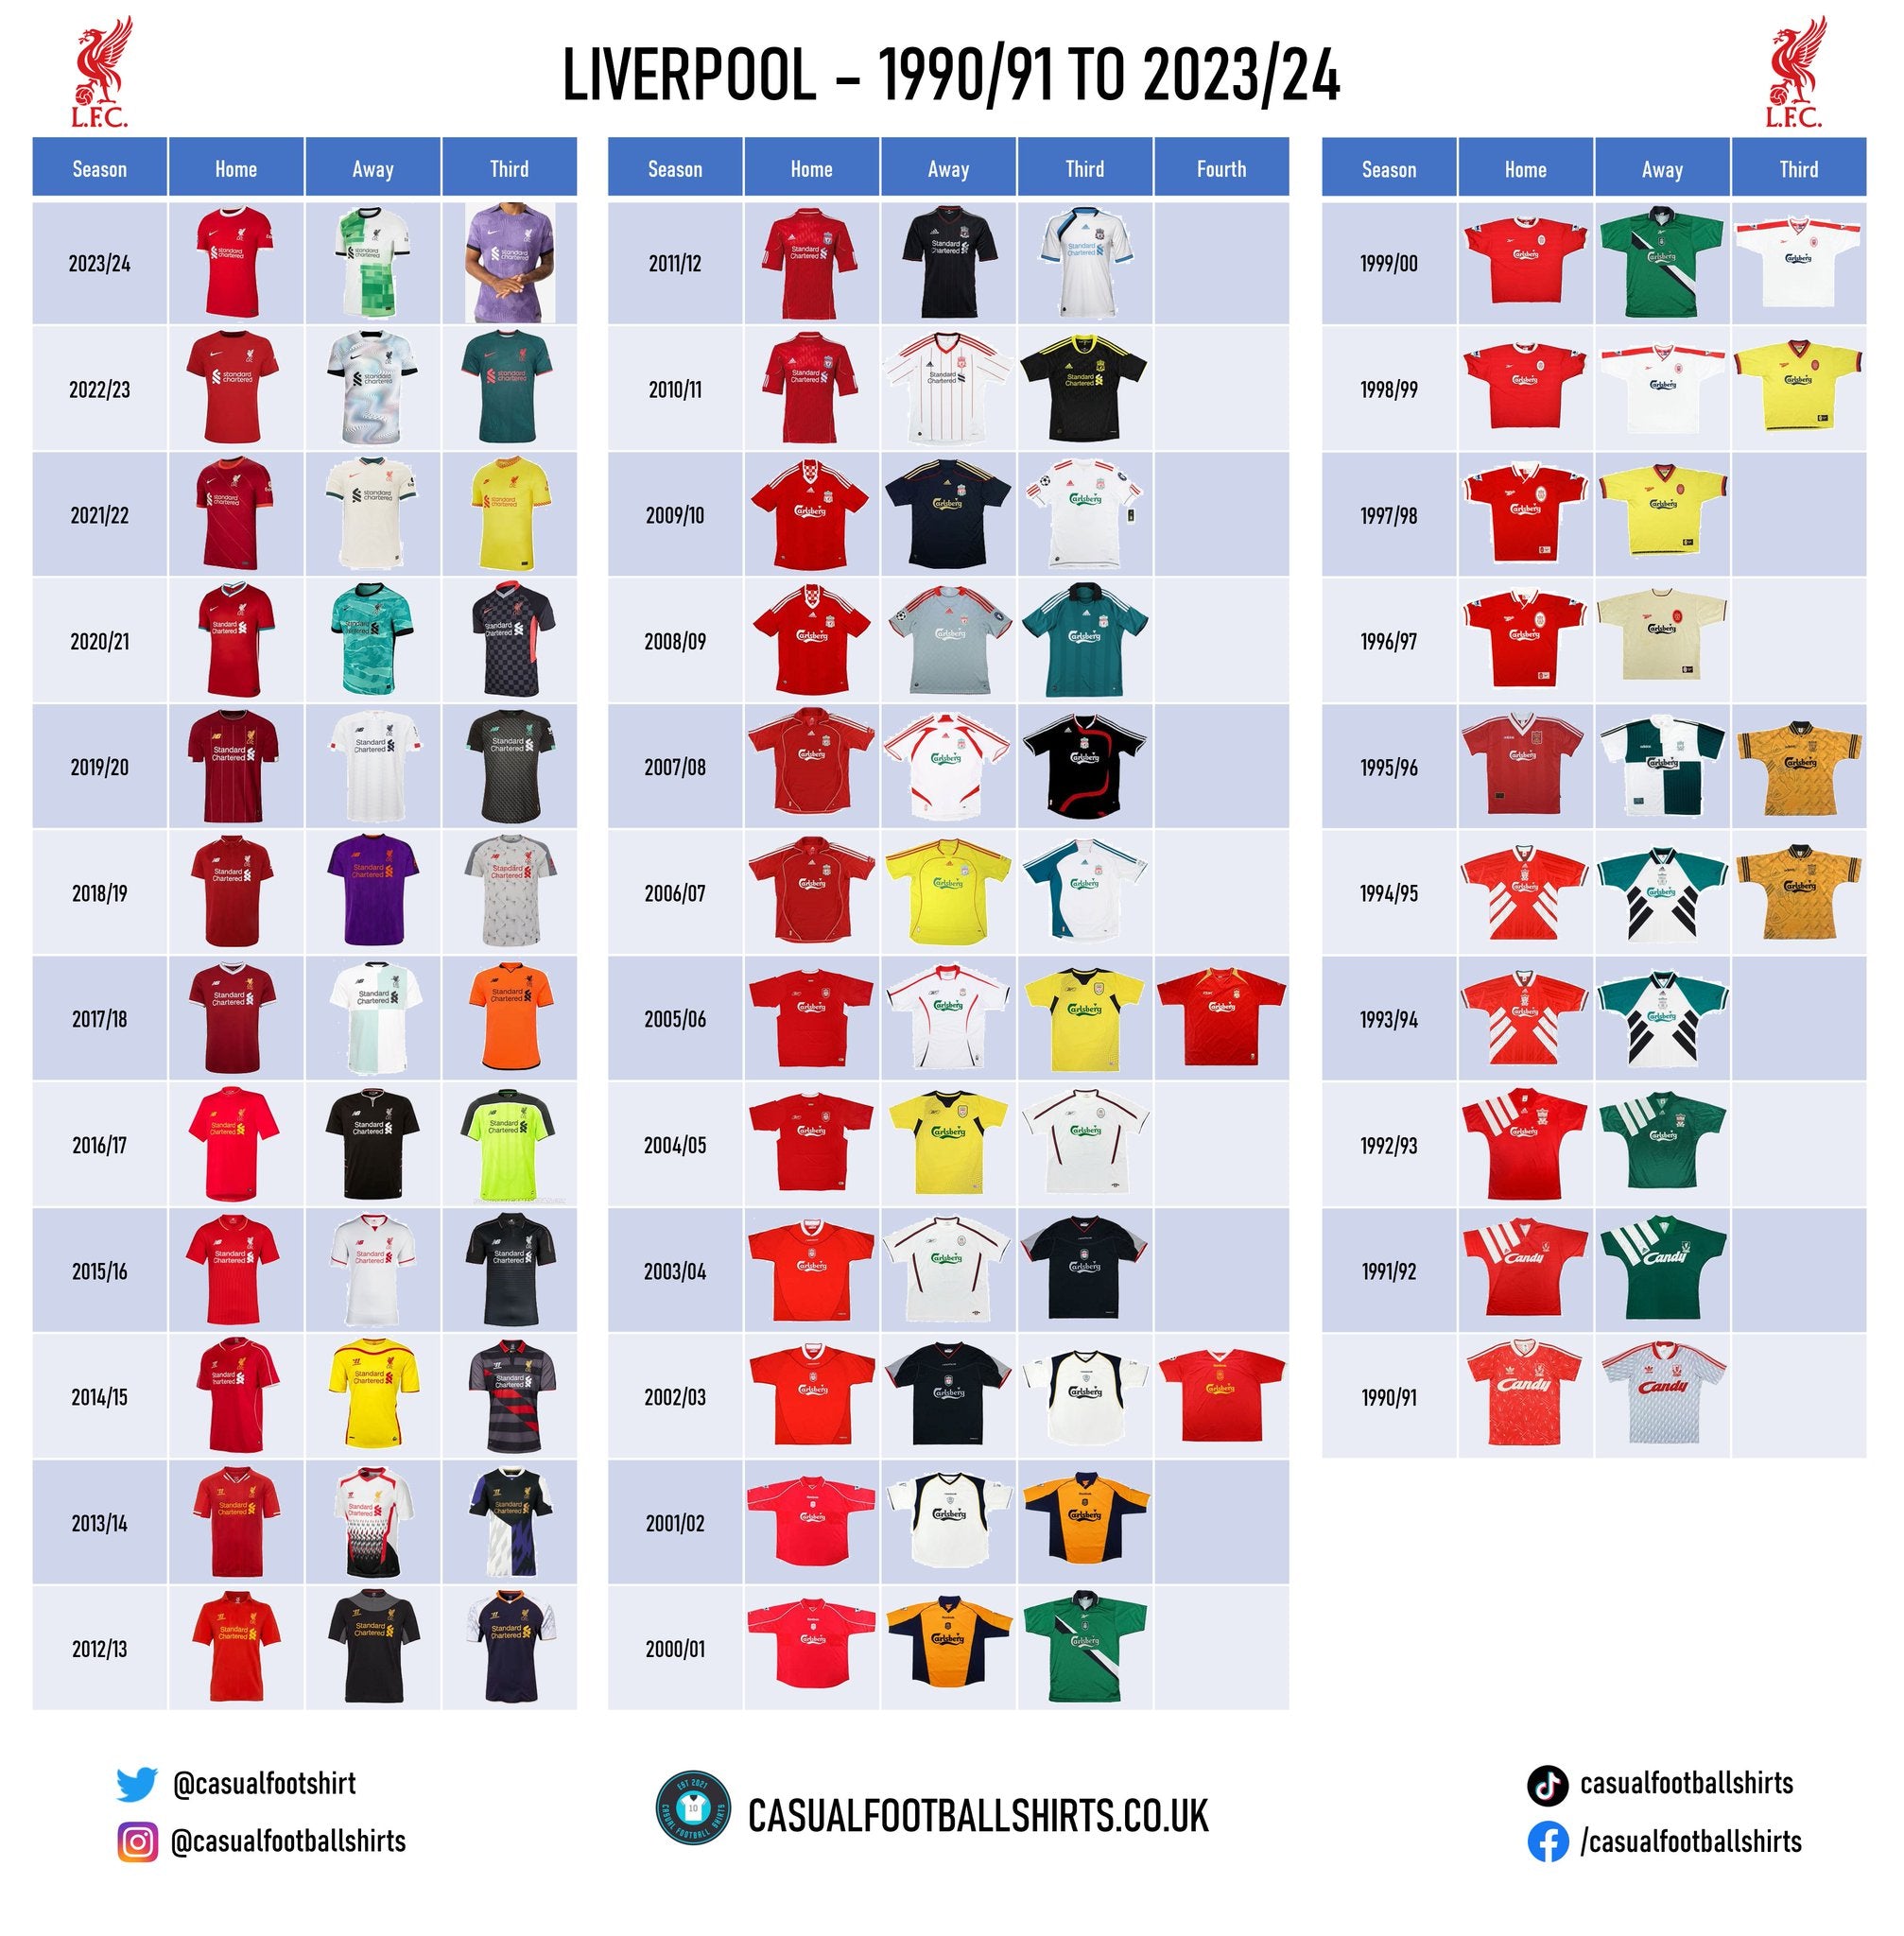 A downloadable checklist of Liverpool shirts from 1990 onwards